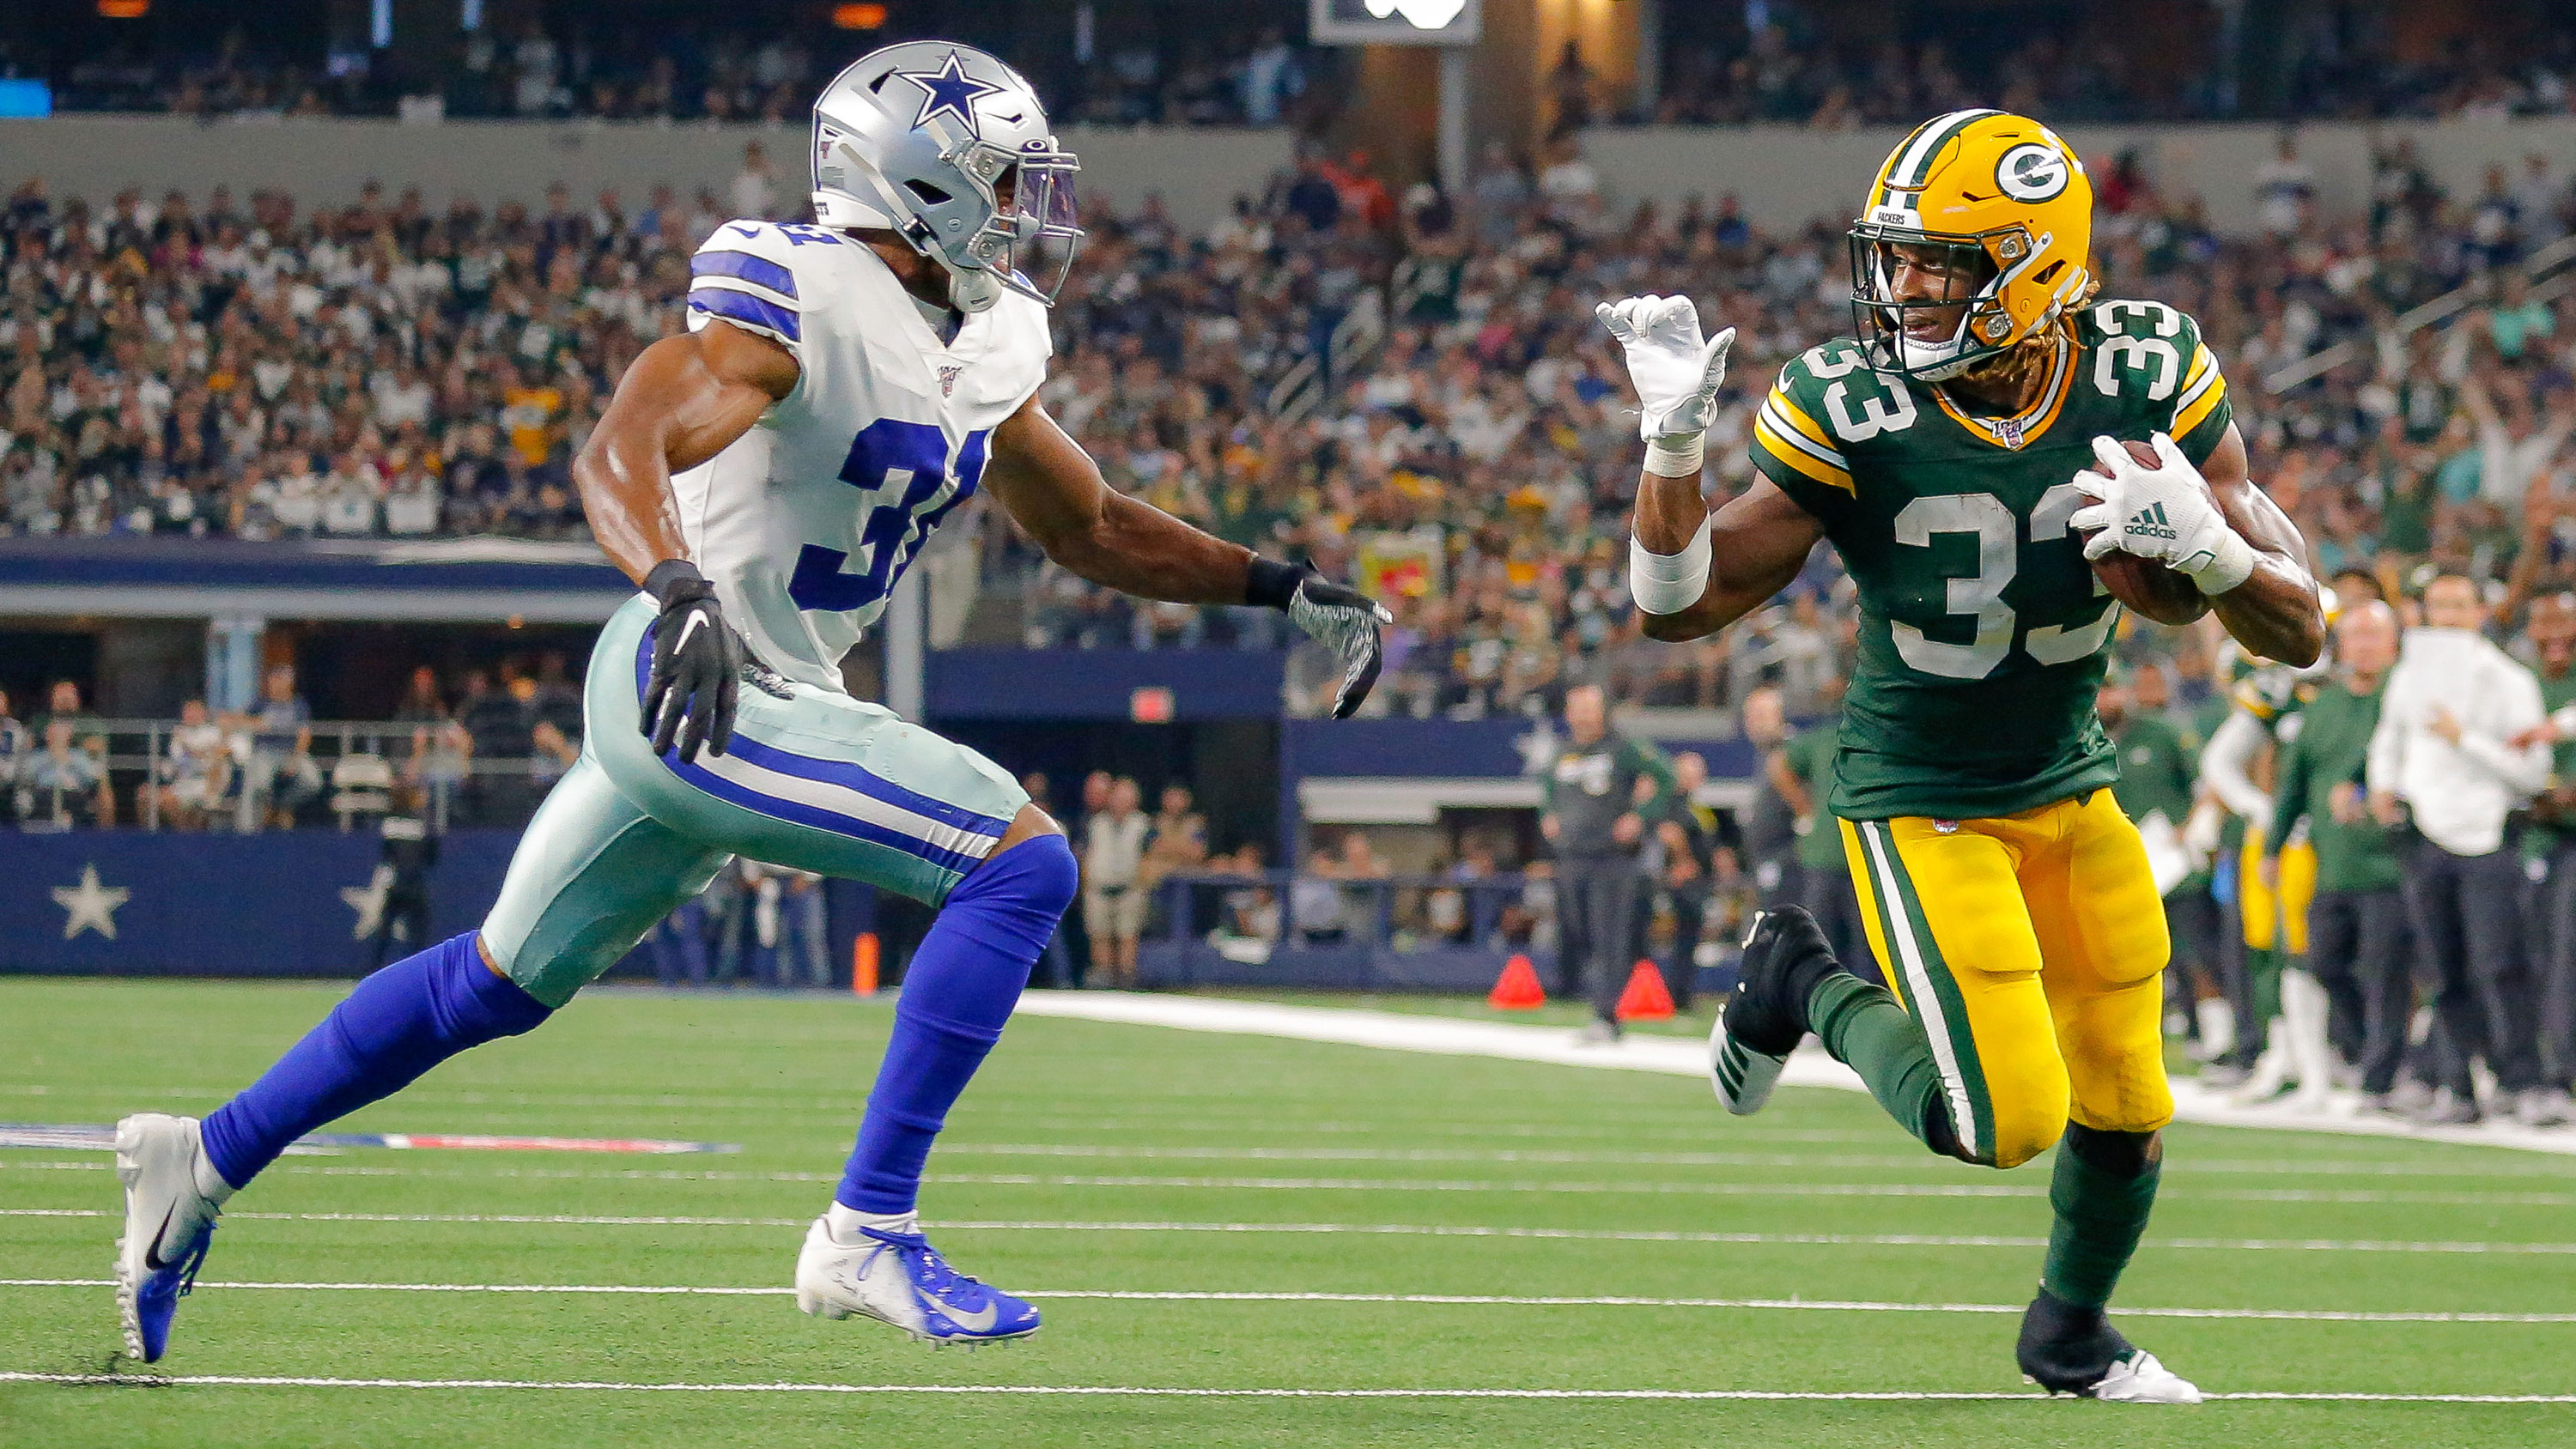 Aaron Jones was fined $10,000 for taunting on his touchdown run against the Cowboys